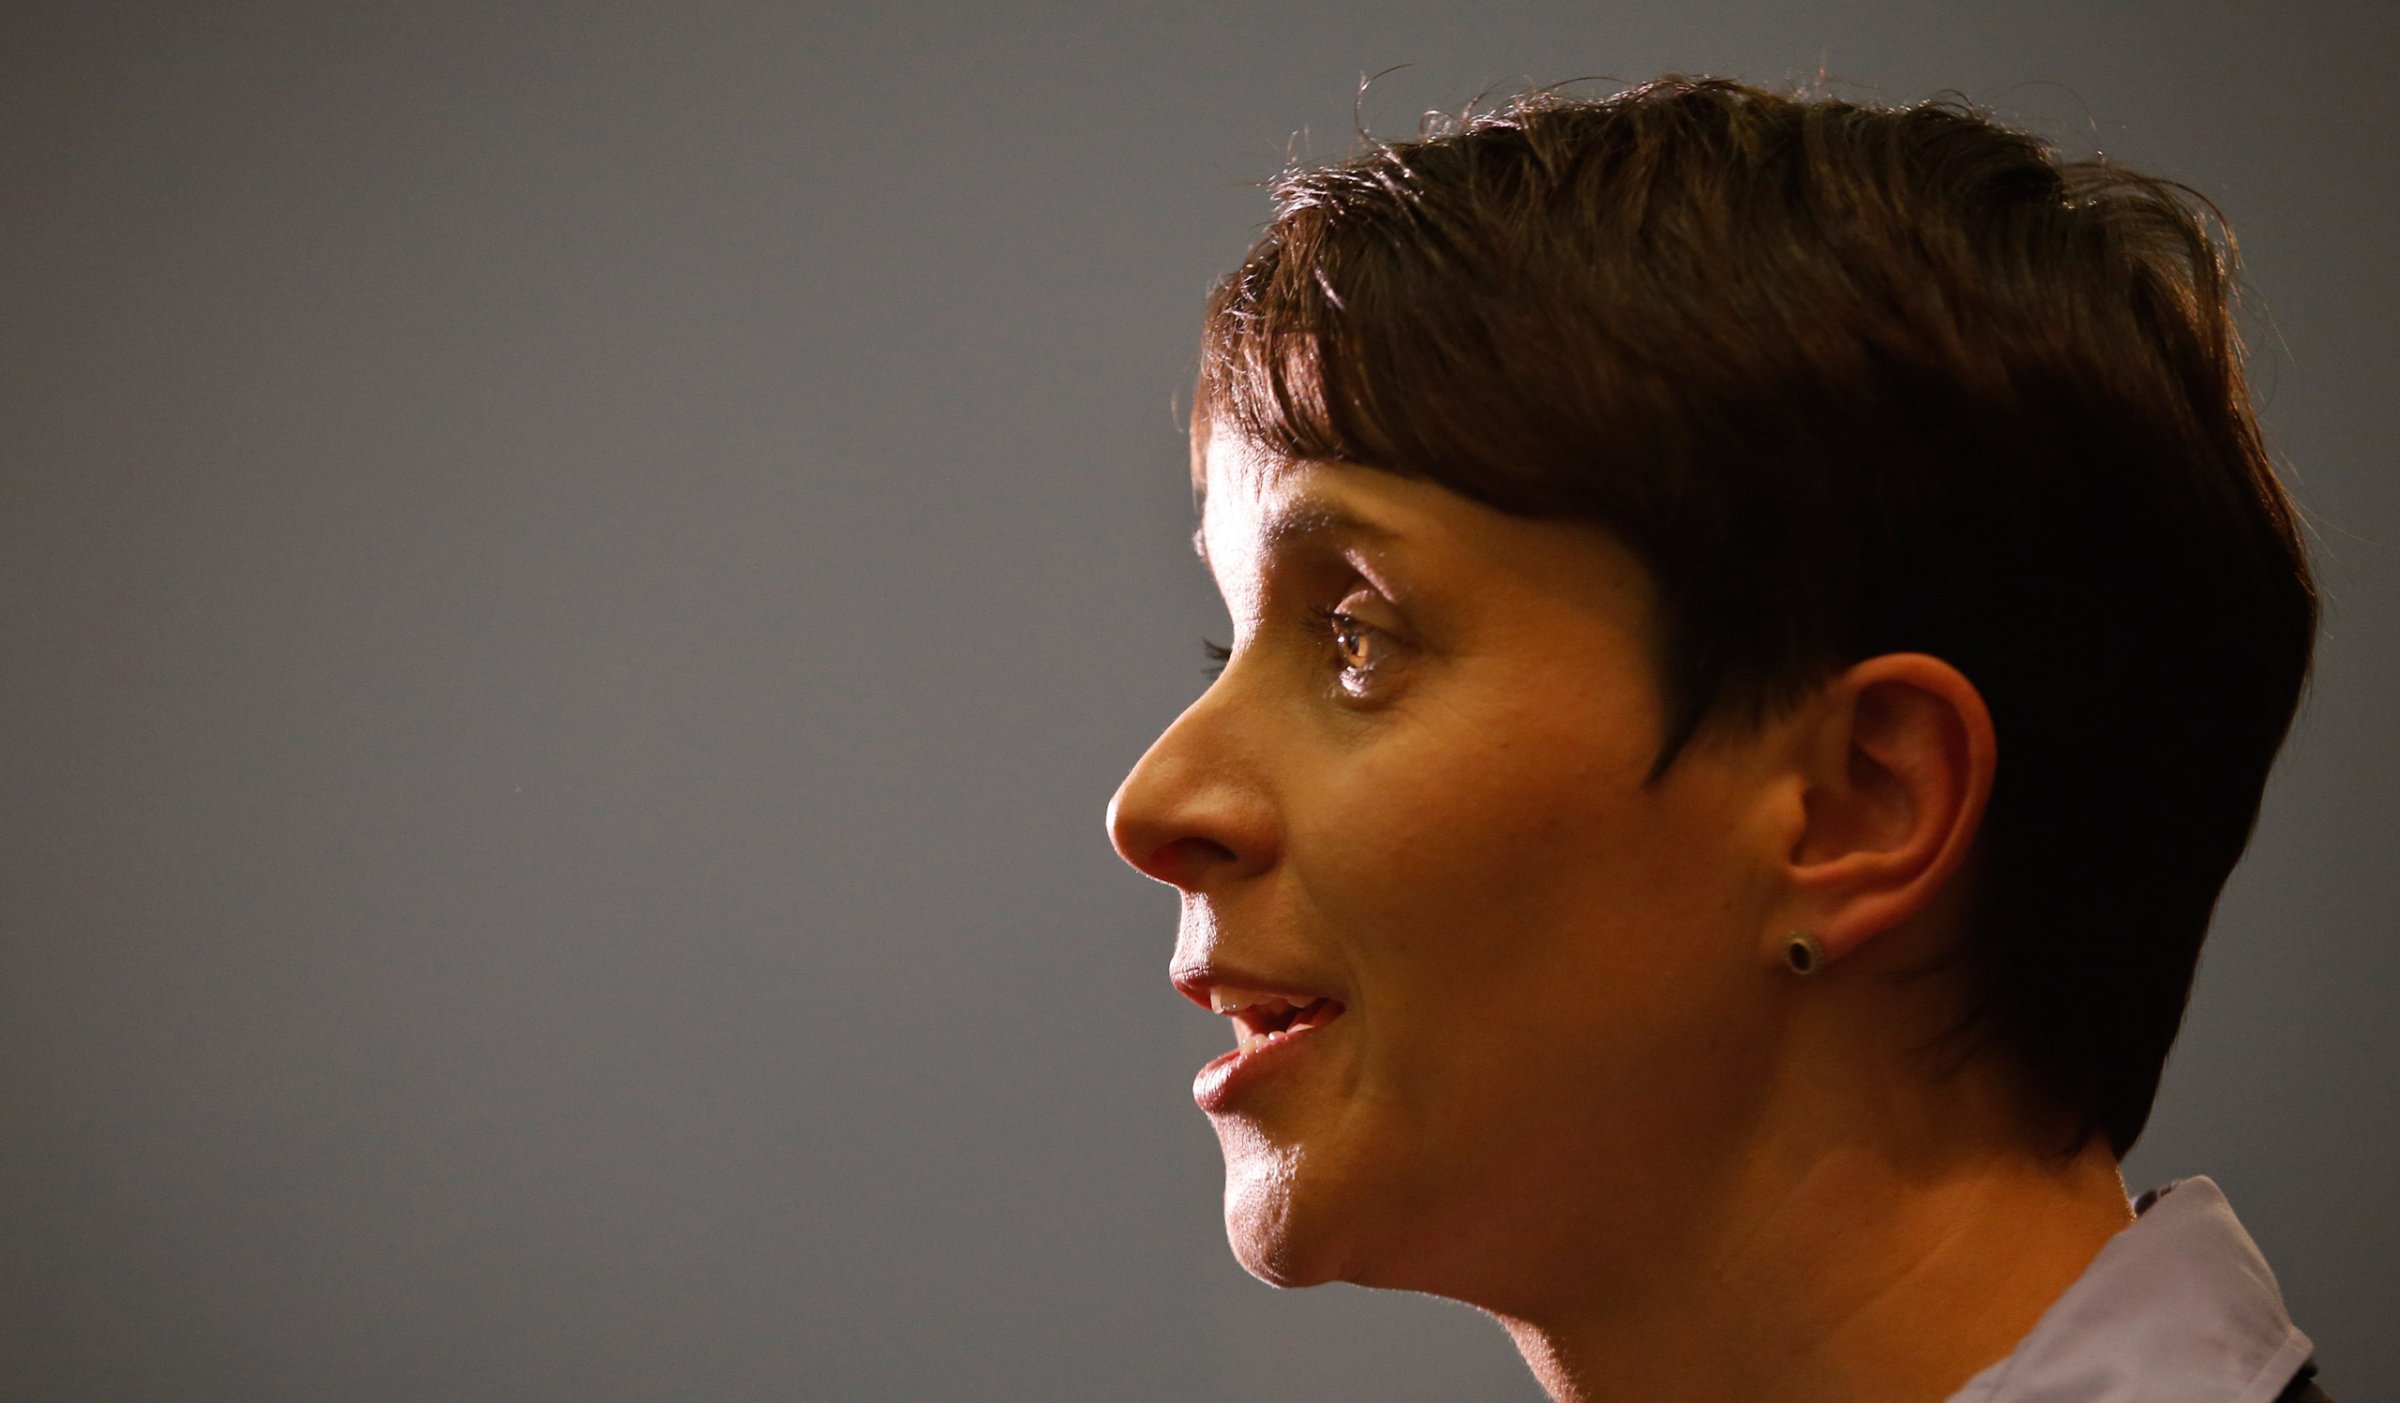 Petry, chairwFrauke Petry, chairwoman of the anti-immigration party Alternative for Germany (AfD) talks to the media after first exit polls in three regional state elections at the AfD party's election night party in Berlin, Germany, March 13, 2016. REUTERS/Fabrizio Bensch - RTX28Z4Coman of the anti-immigration party Alternative for Germany talks to the media after first exit polls in three regional state elections at the AfD party's election night party in Berlin